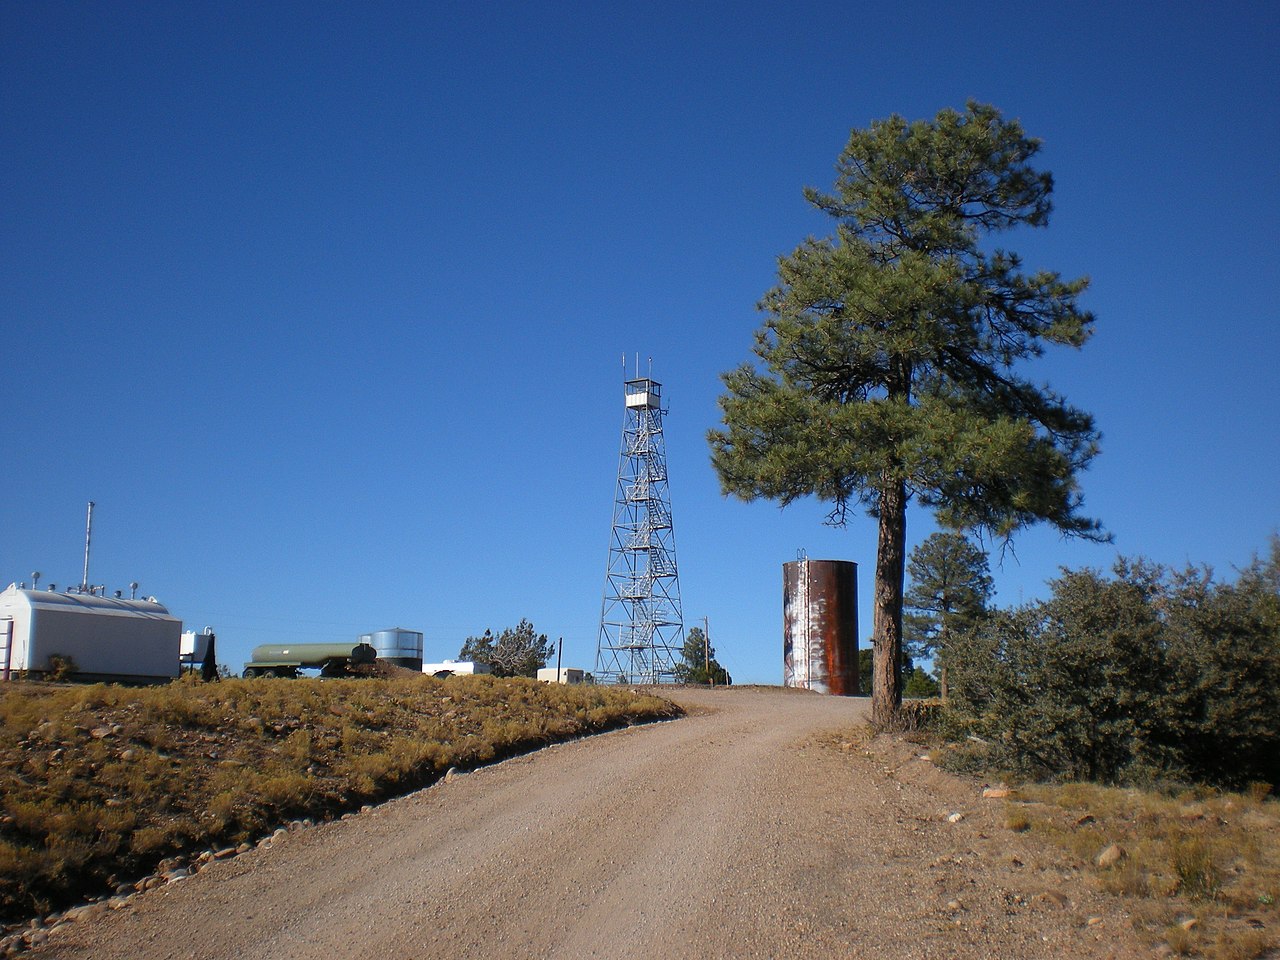 File:Arizona,Mohave County Thorton Fire Tower near Frazier Wells, Hualapai Indian Reservation ...